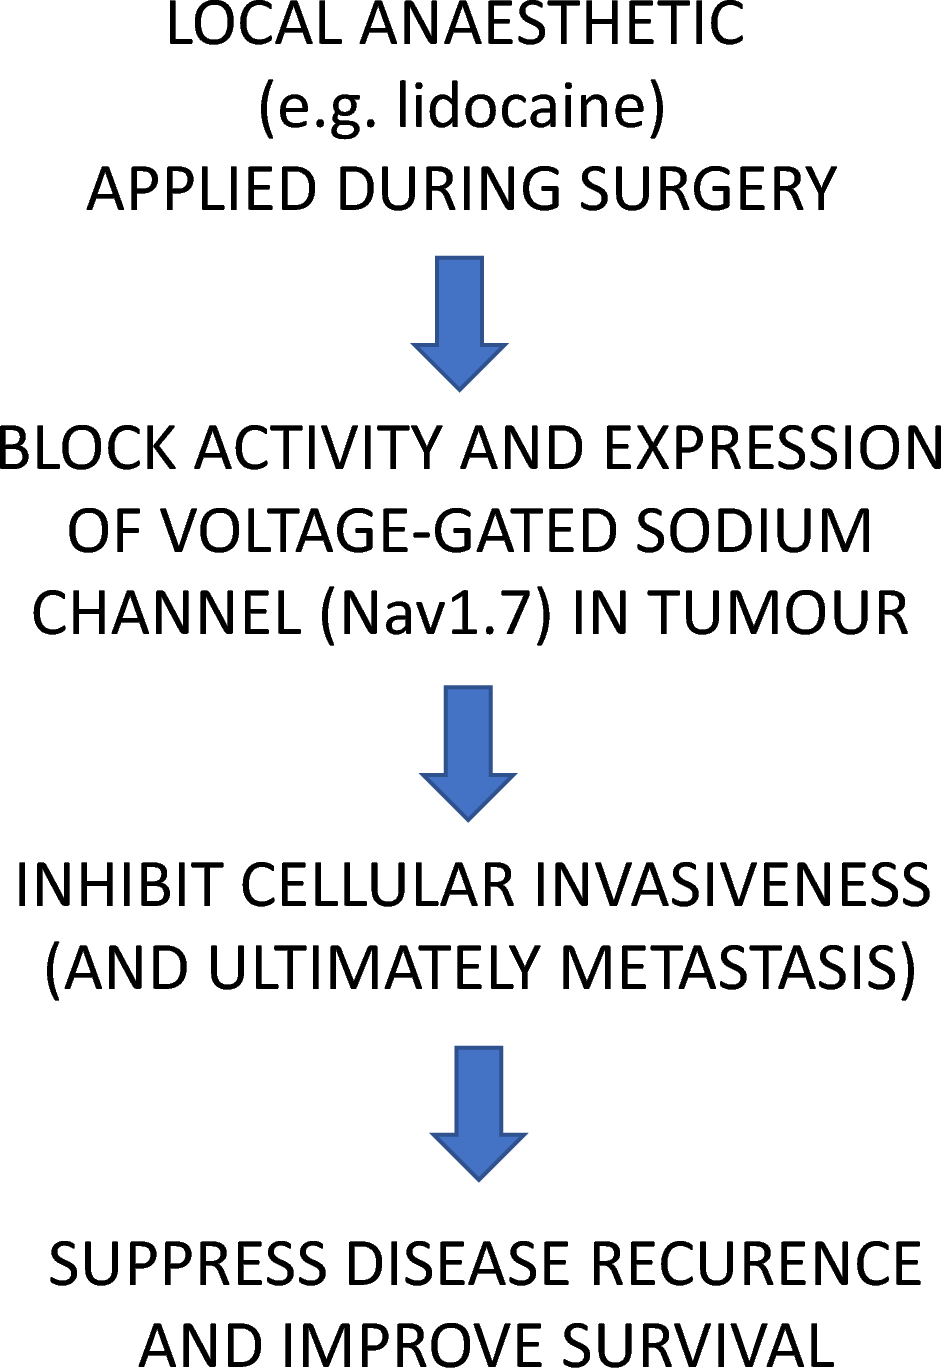 Lidocaine Inhibits Rat Prostate Cancer Cell Invasiveness and Voltage-Gated Sodium Channel Expression in Plasma Membrane